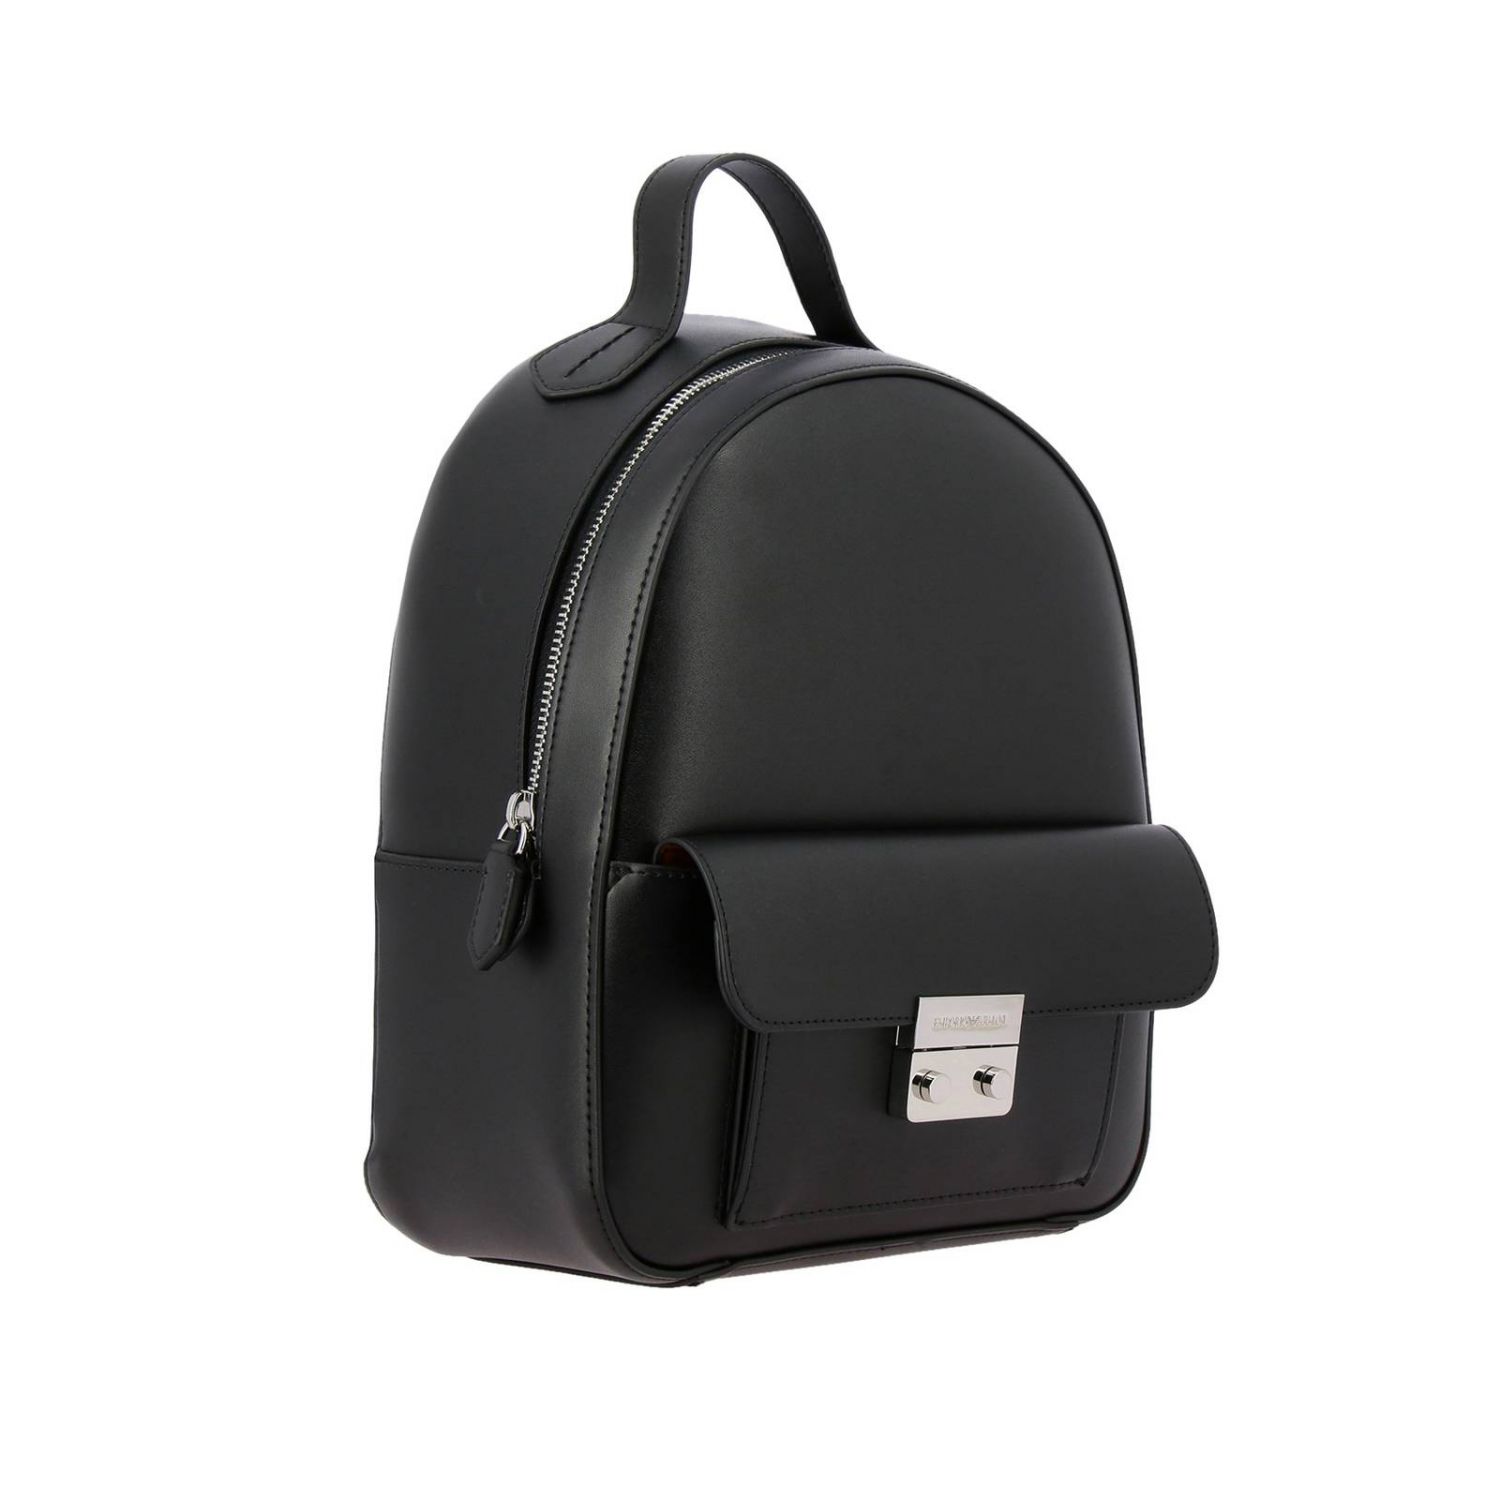 Emporio Armani Outlet: Backpack women | Backpack Emporio Armani Women ...